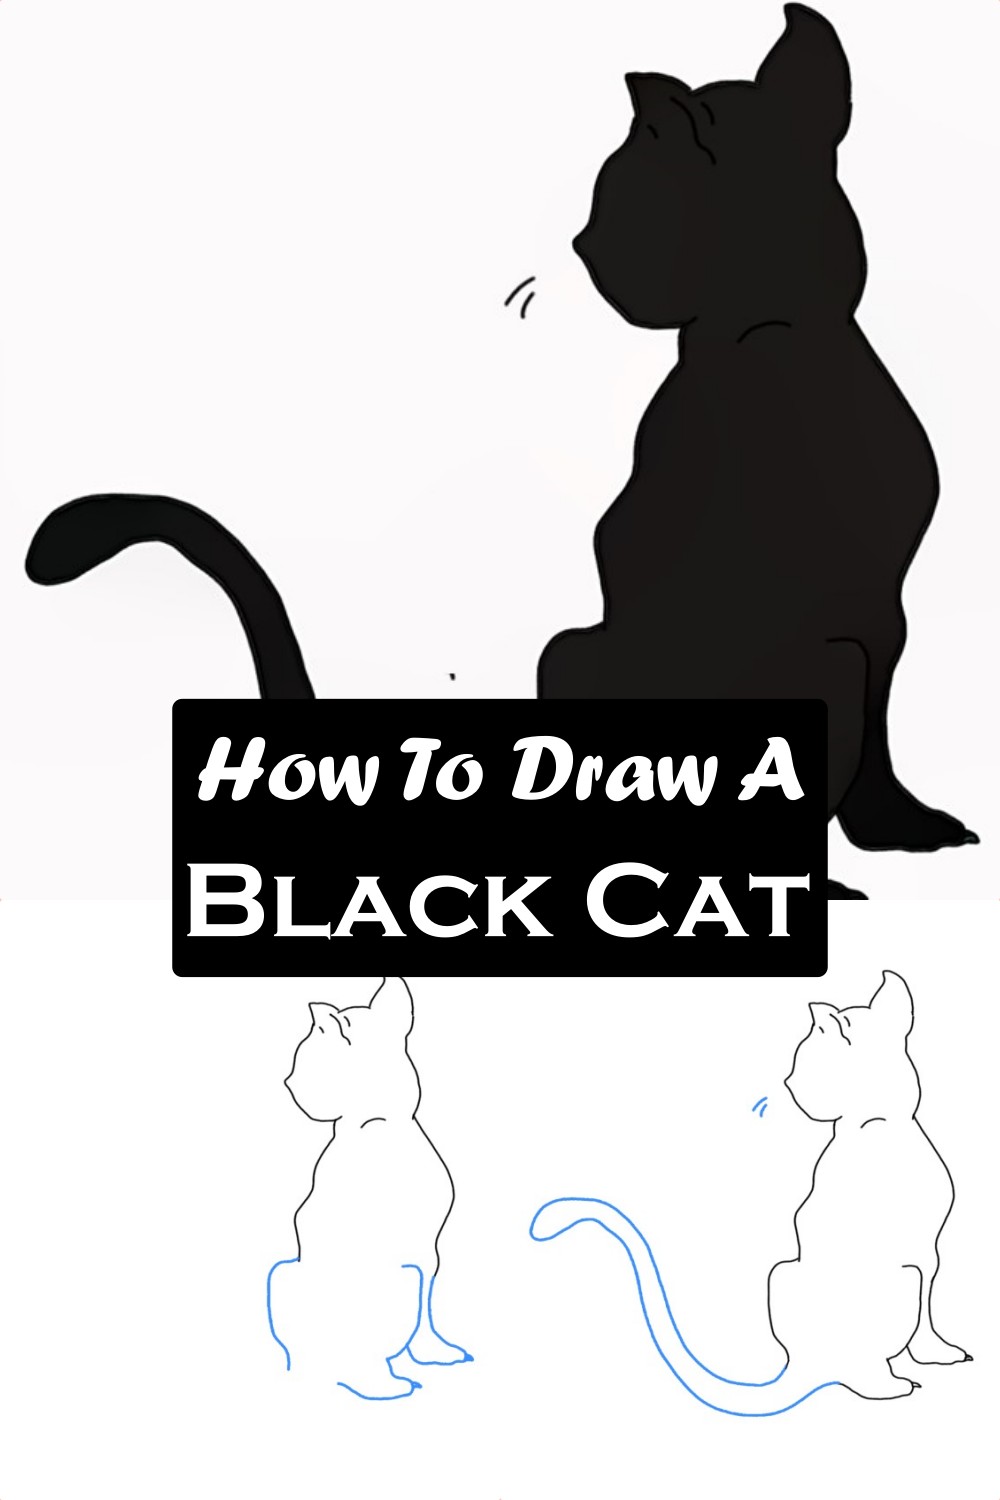 How To Draw A Black Cat